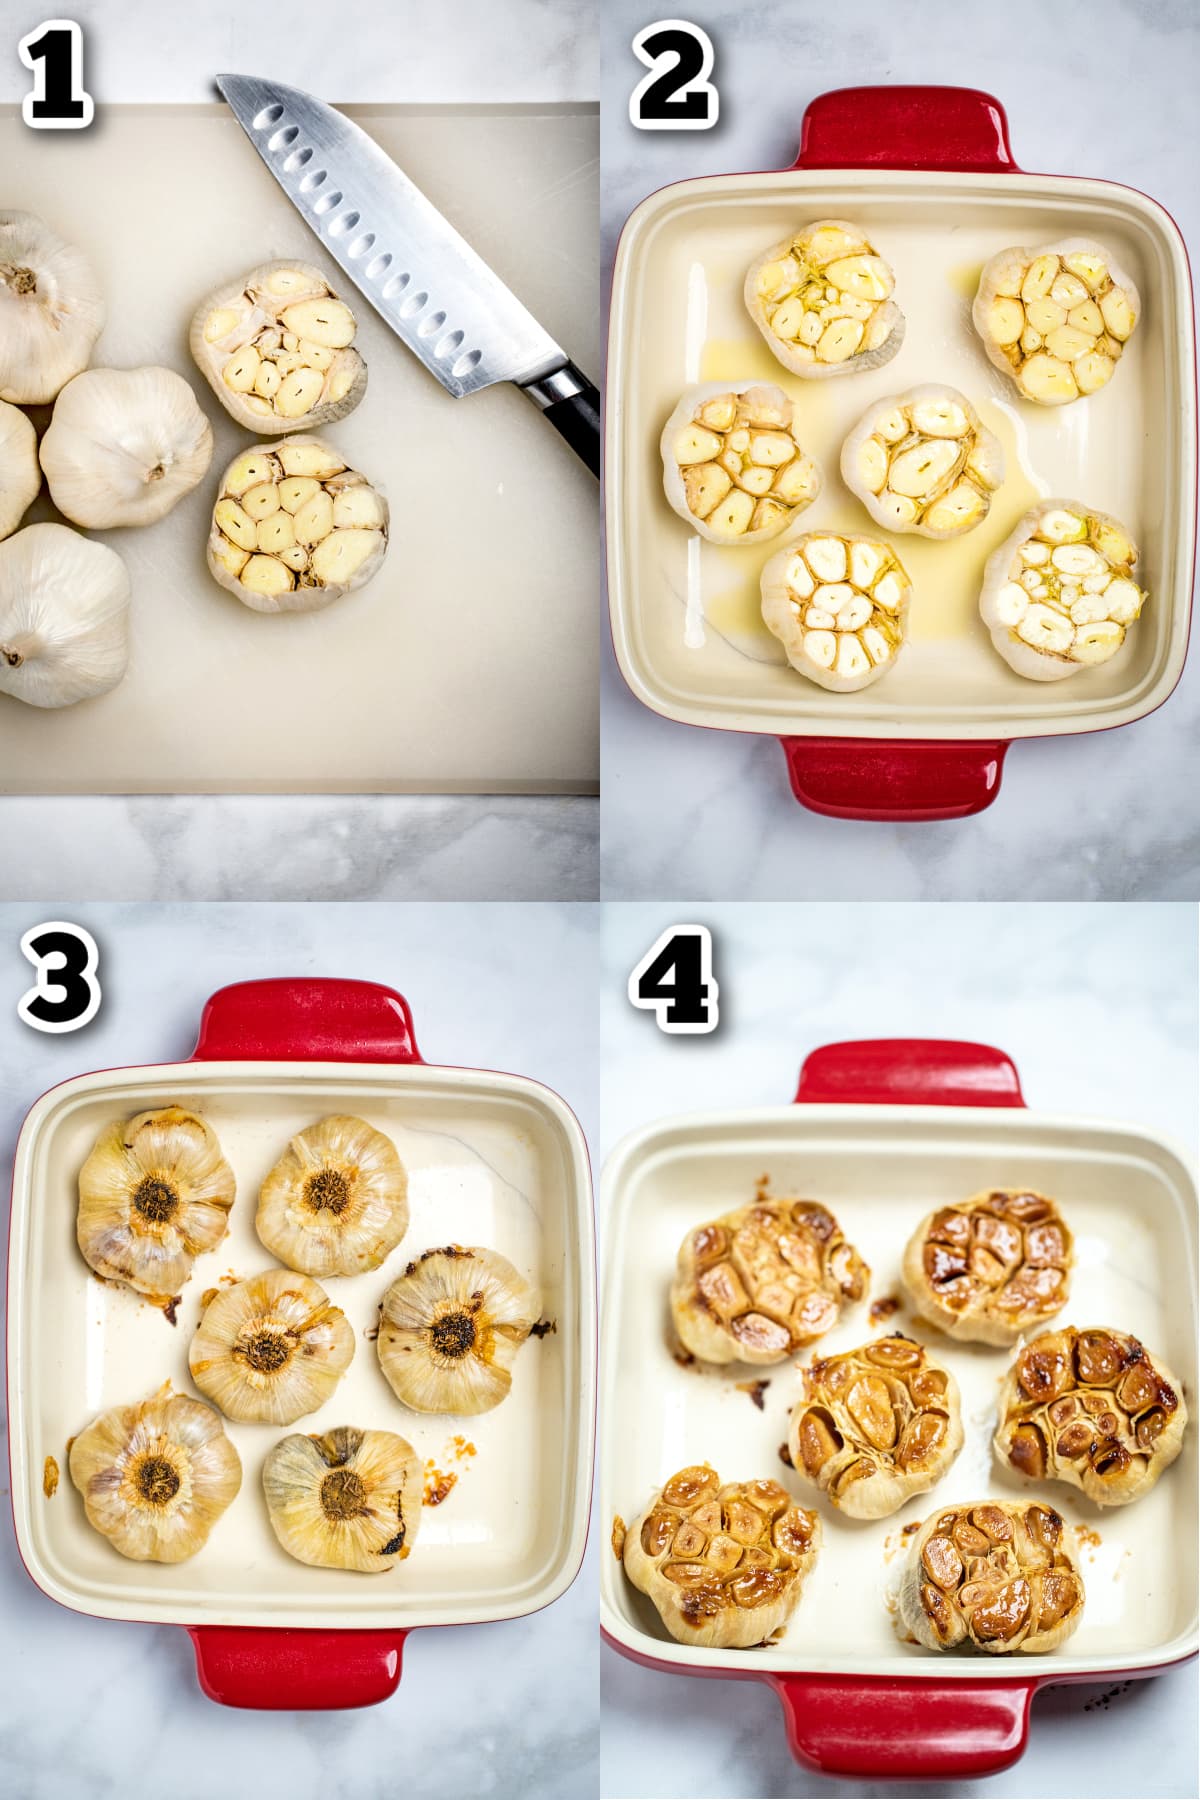 Step by step instructions for how to make roasted garlic bulbs.